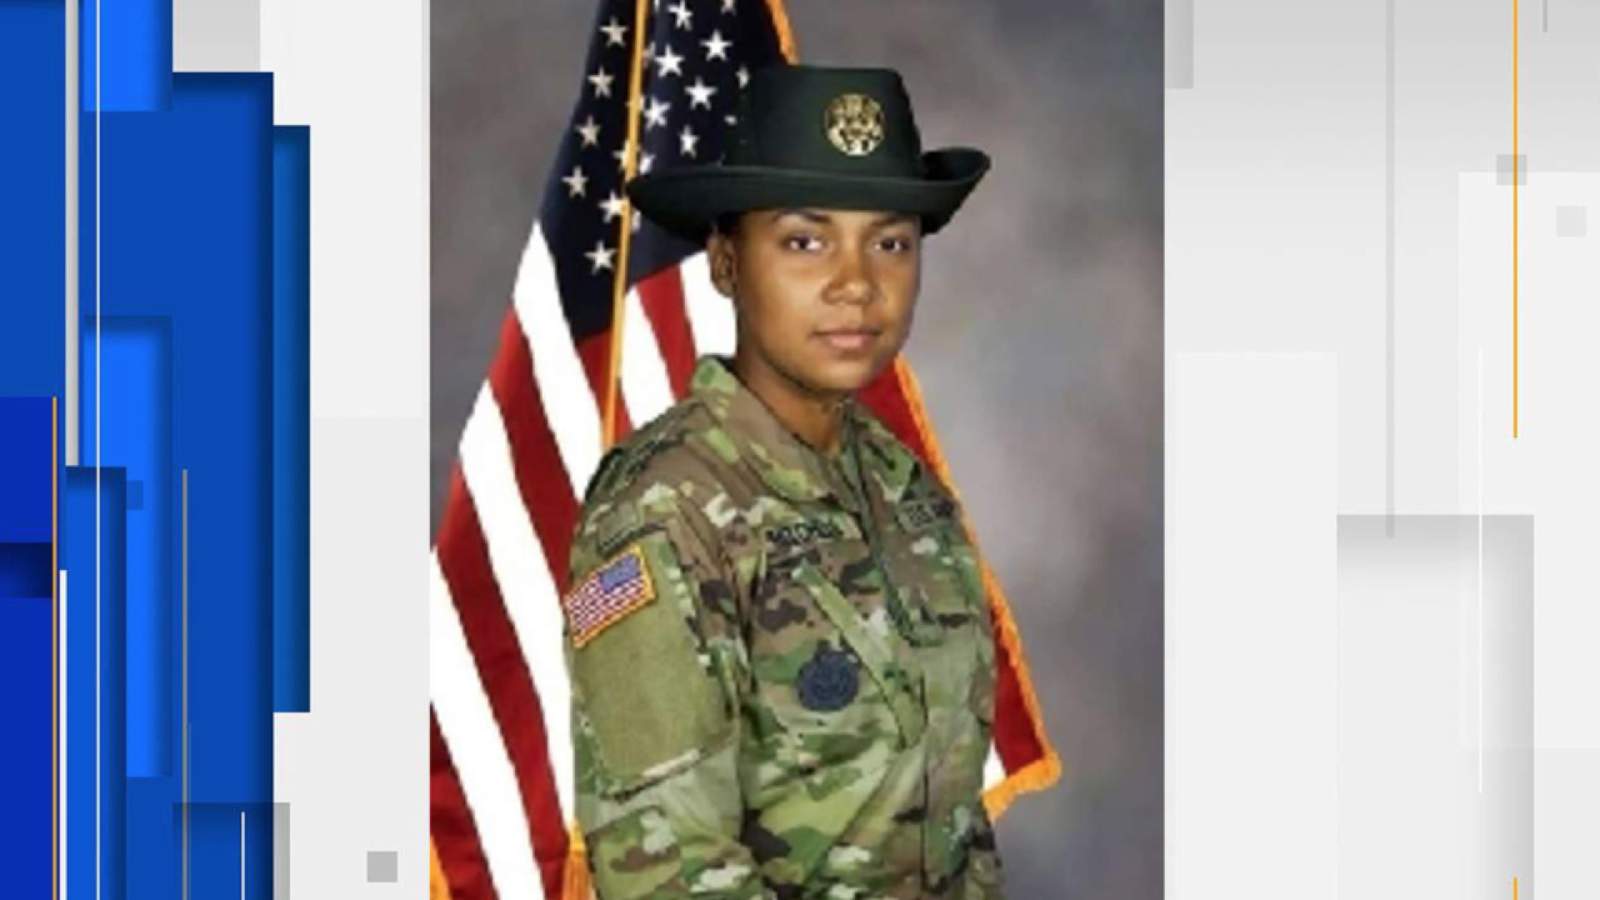 Police searching for information in death of drill sergeant early New Year’s Day